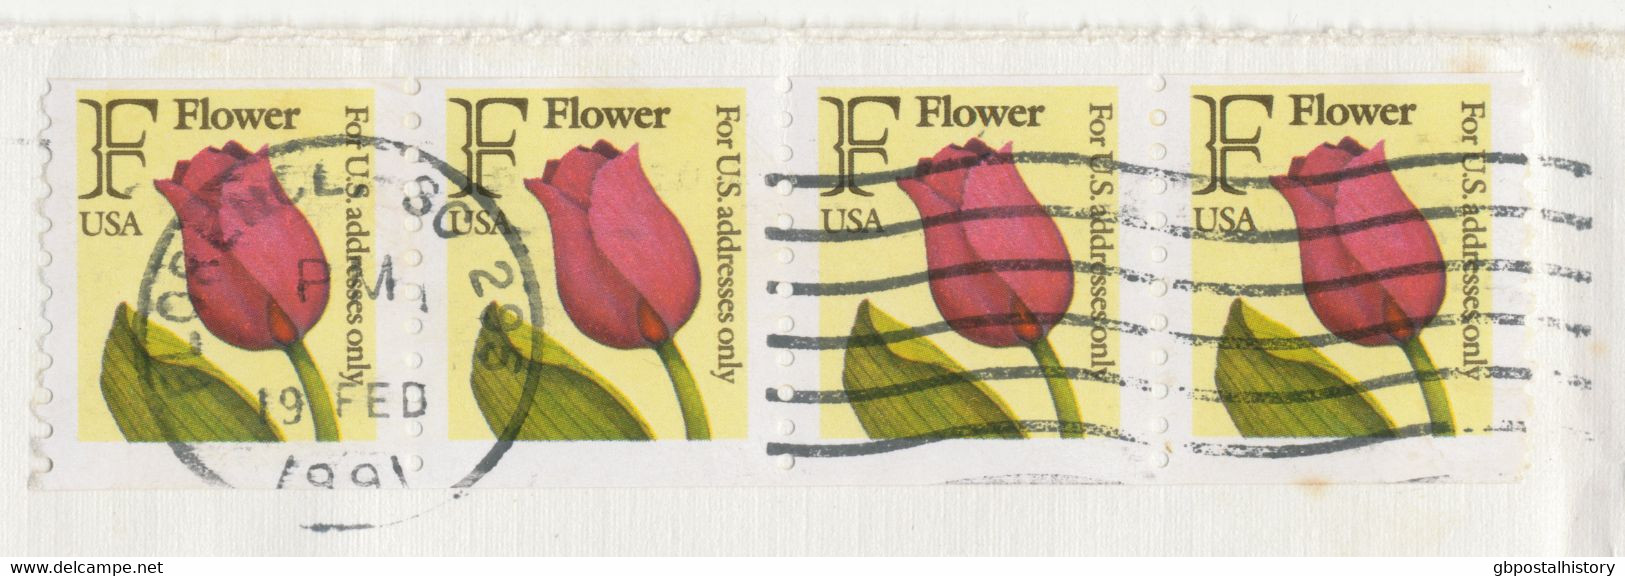 USA 1991, (29) C (4x) F Flower Stamp (FOR U.S. ADDRESSES ONLY) On Very Fine Cover From „FLORENCE, SC  295“ To Germany – - Covers & Documents